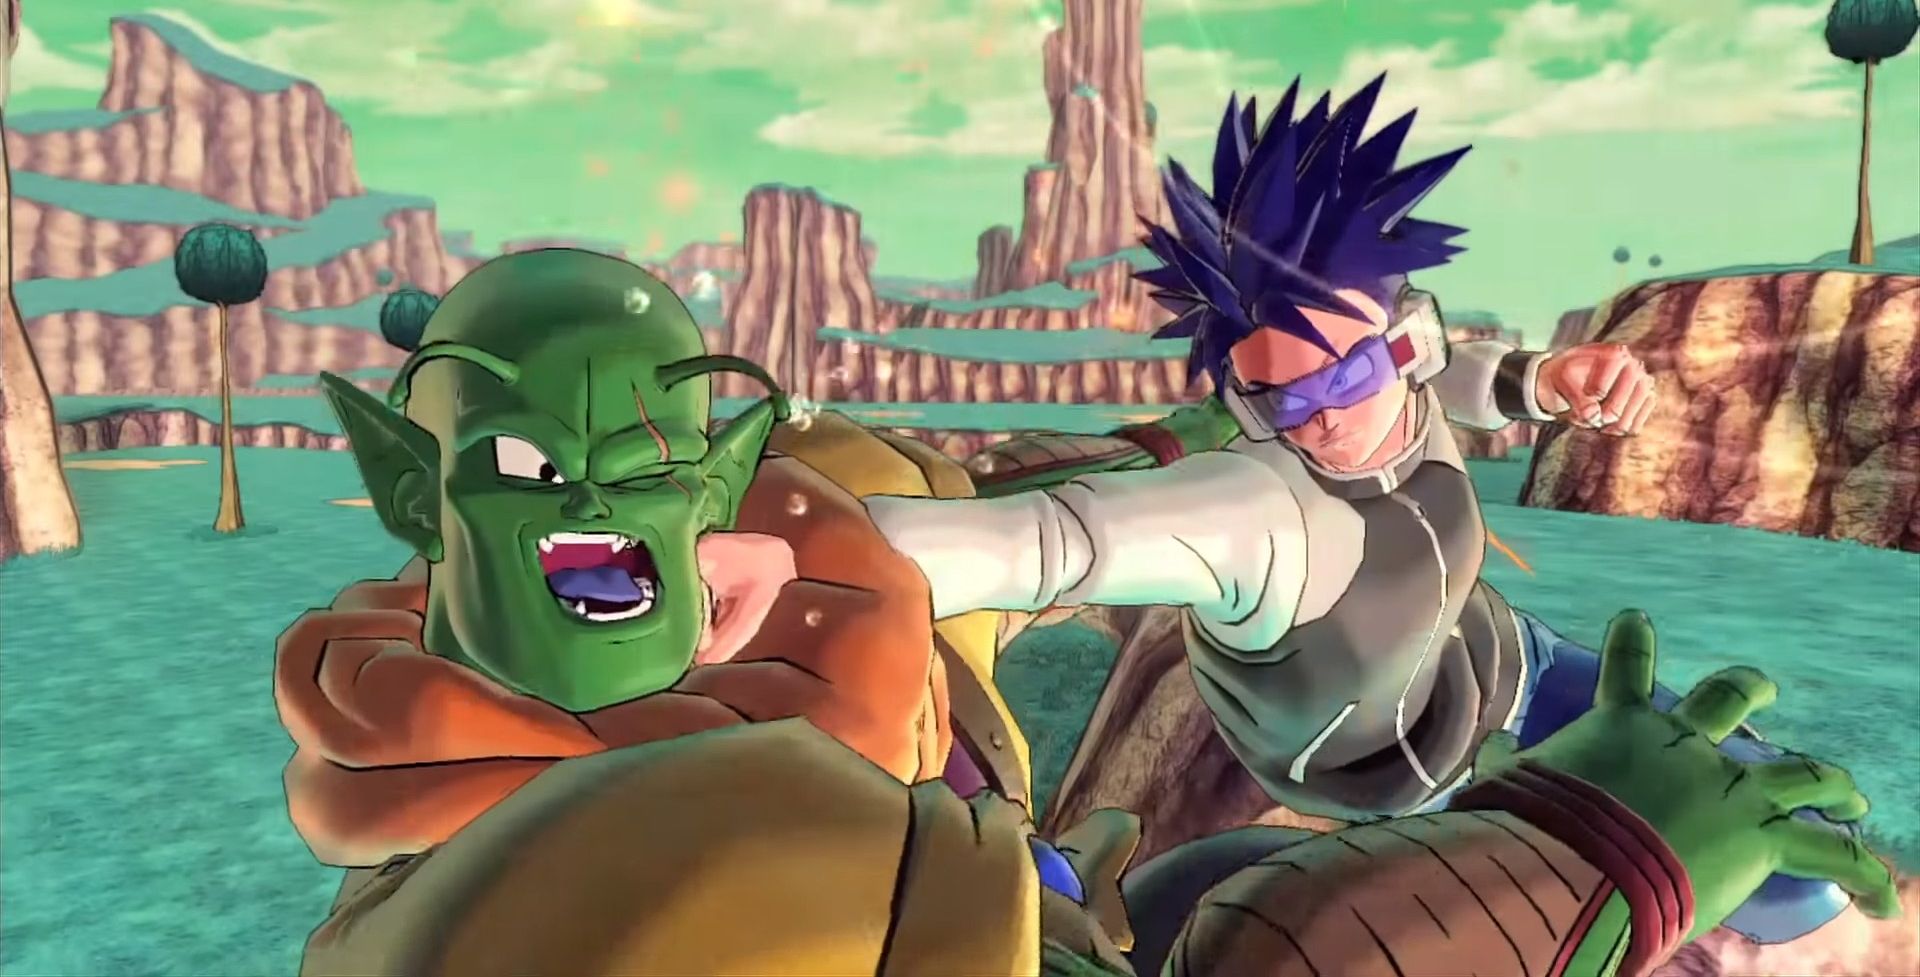 DRAGON BALL XENOVERSE 2  PS4 / XBox One / Switch